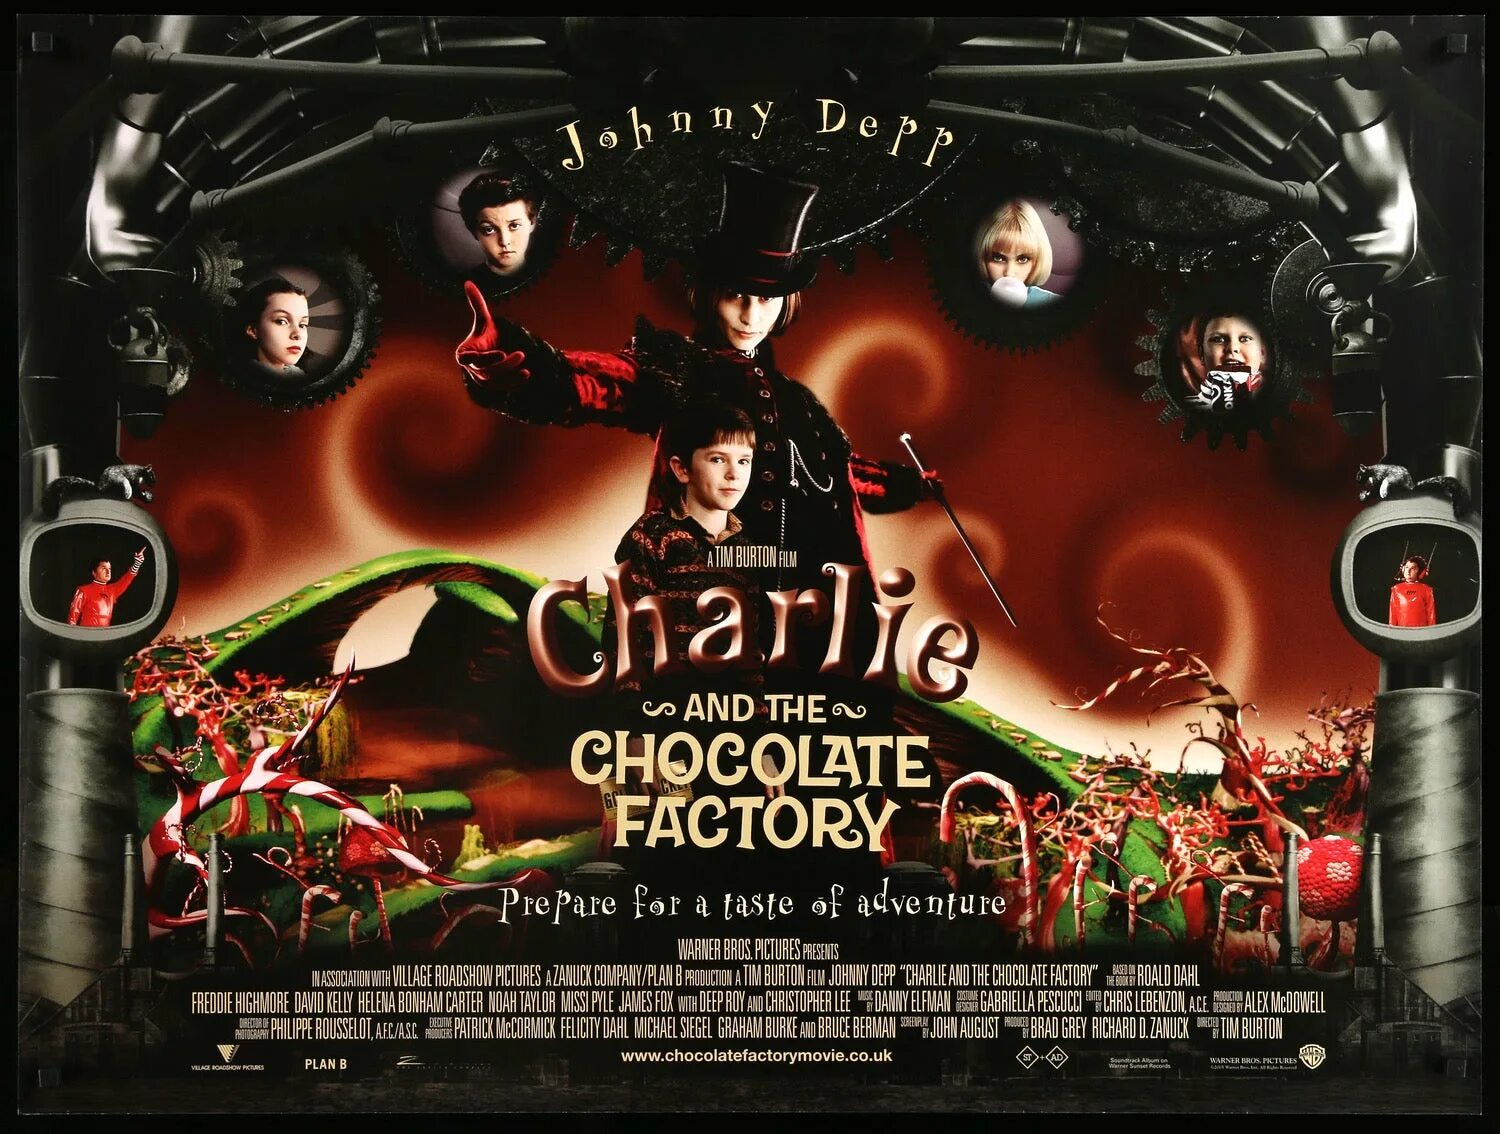 Charlie and the Chocolate Factory 2005 poster. Charlie and the Chocolate Factory Постер. Charlie and the Chocolate Factory 2005 обложка. Чарли и шоколадная фабрика афиша.